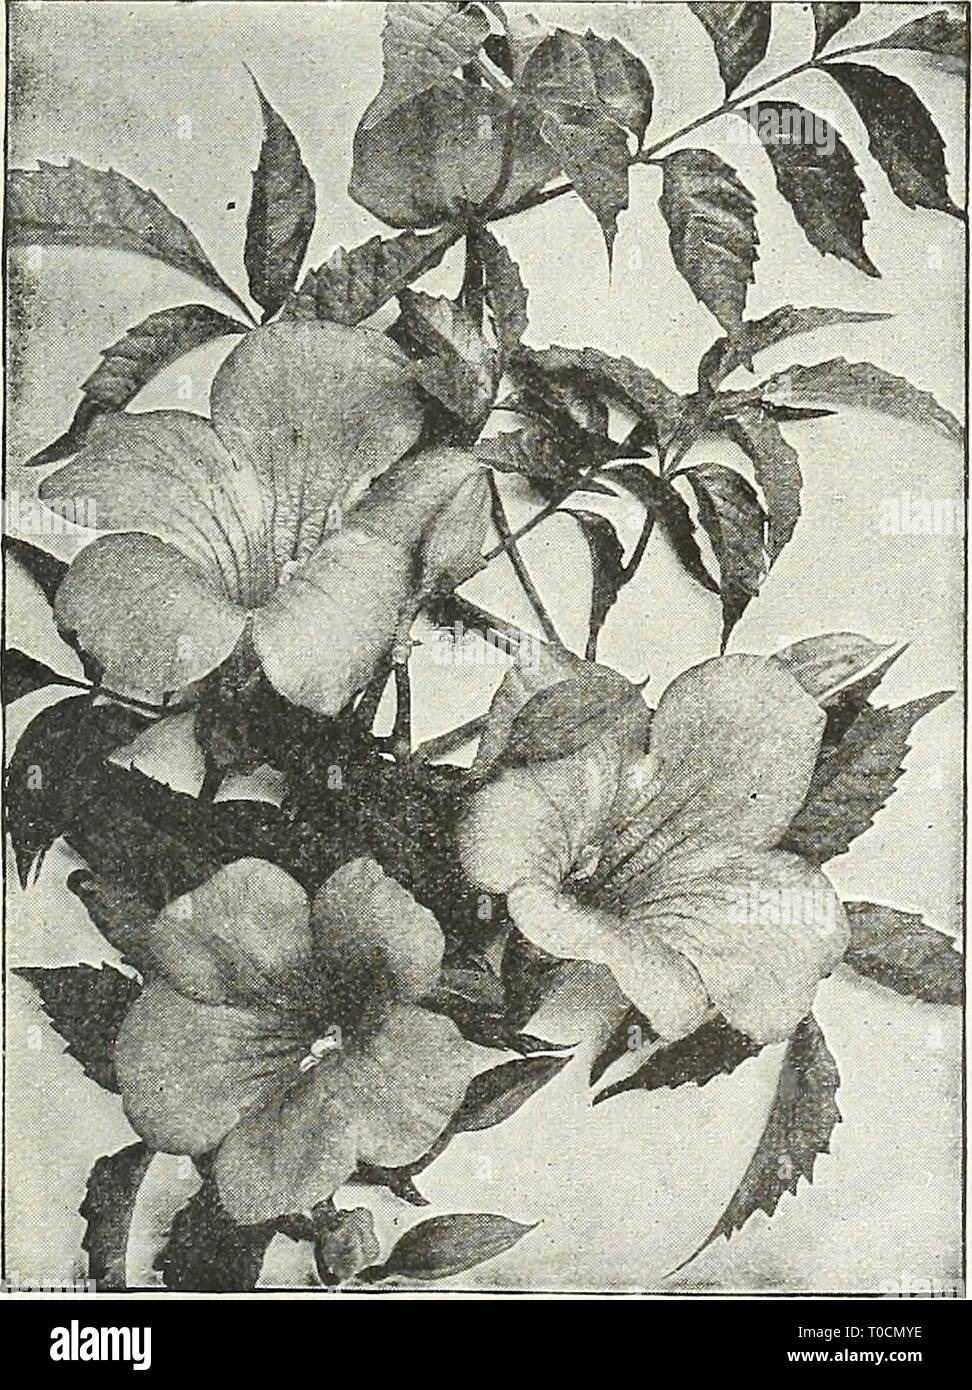 Dreer's garden book 1926 (1926) Dreer's garden book 1926 dreersgardenbook1926henr Year: 1926  BiGNONiA, OR Trumpet Vine Ampelopsis Veitchi Quinquefolia (Virginia Creeper or American Ivy). This well known climber is one of the best and quickest growing varieties for covering trees, trellises, arbors, etc.; its large, deep green foliage assumes brilliant shades of yellow, crimson and scarlet in the fall. Strong plants, 40 cts. each; $4.00 per doz.; $25.00 per 100. Veitchi (Boston or Japan Ivy). The most popular climbing plant for covering brick, stone or wooden walls, trees, etc.; when it be- co Stock Photo